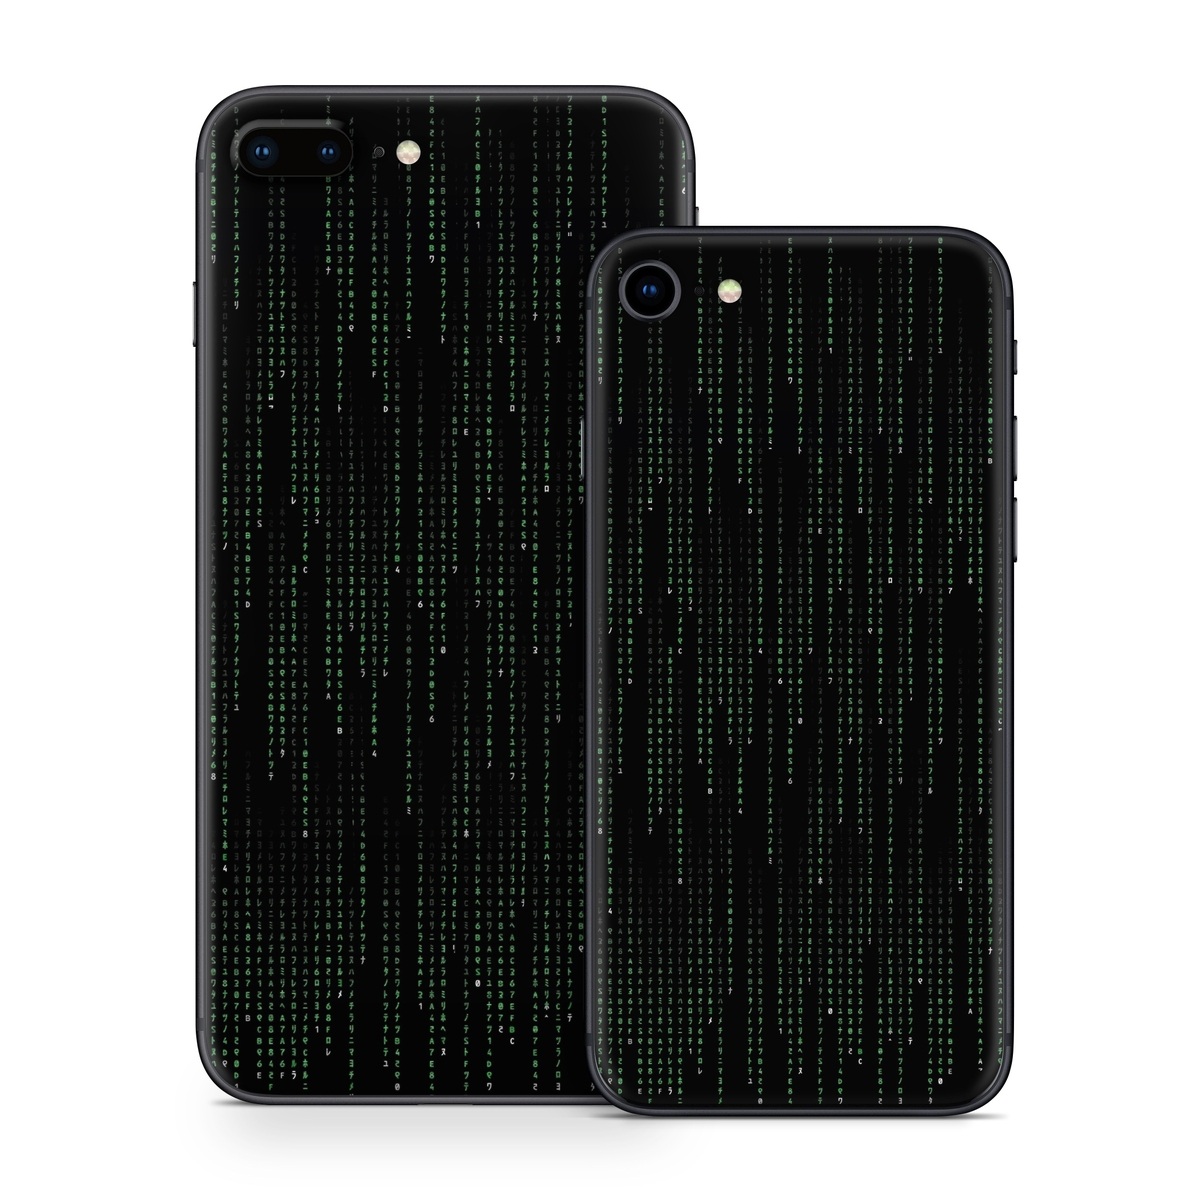 iPhone 8 Series Skin design of Green, Black, Pattern, Symmetry, with black colors